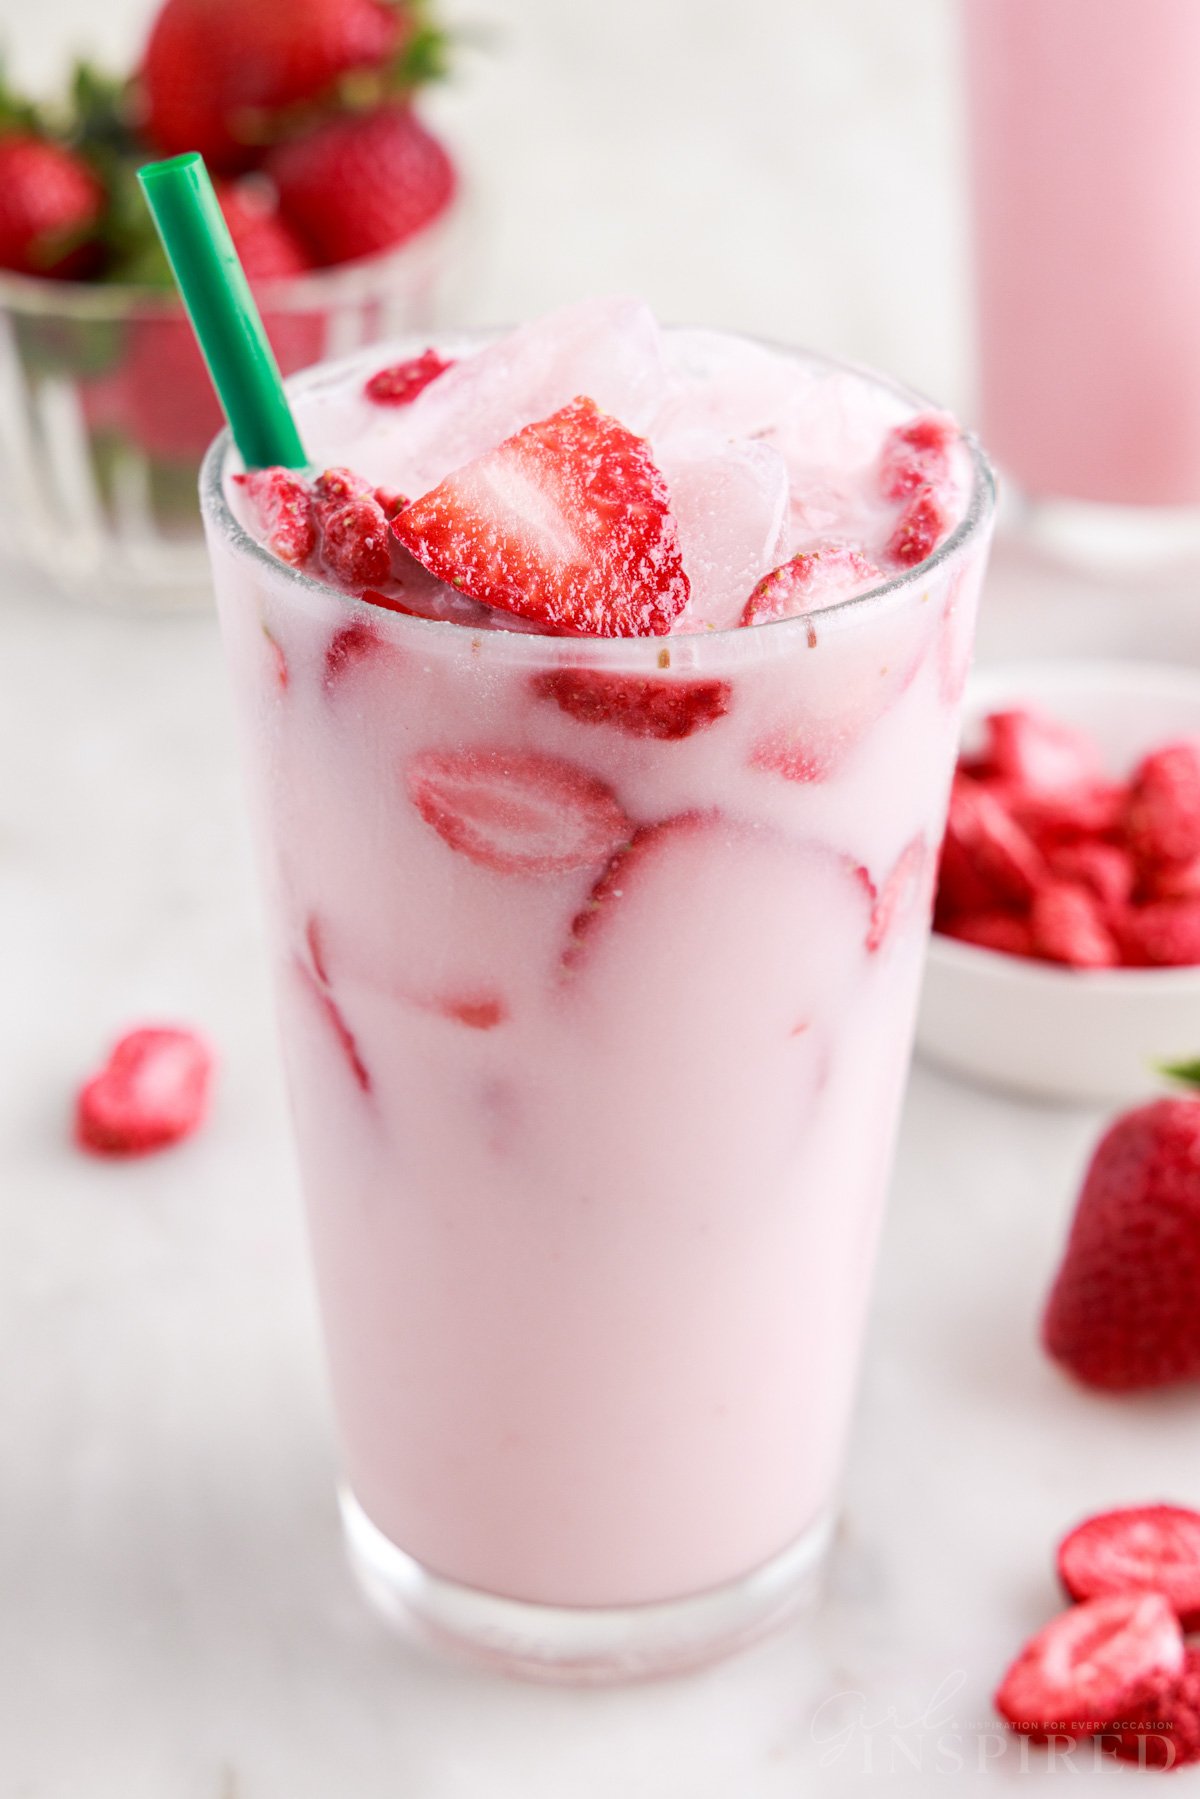 Pink drink in glass with straw and fresh strawberry slices on top, bowl of strawberries.